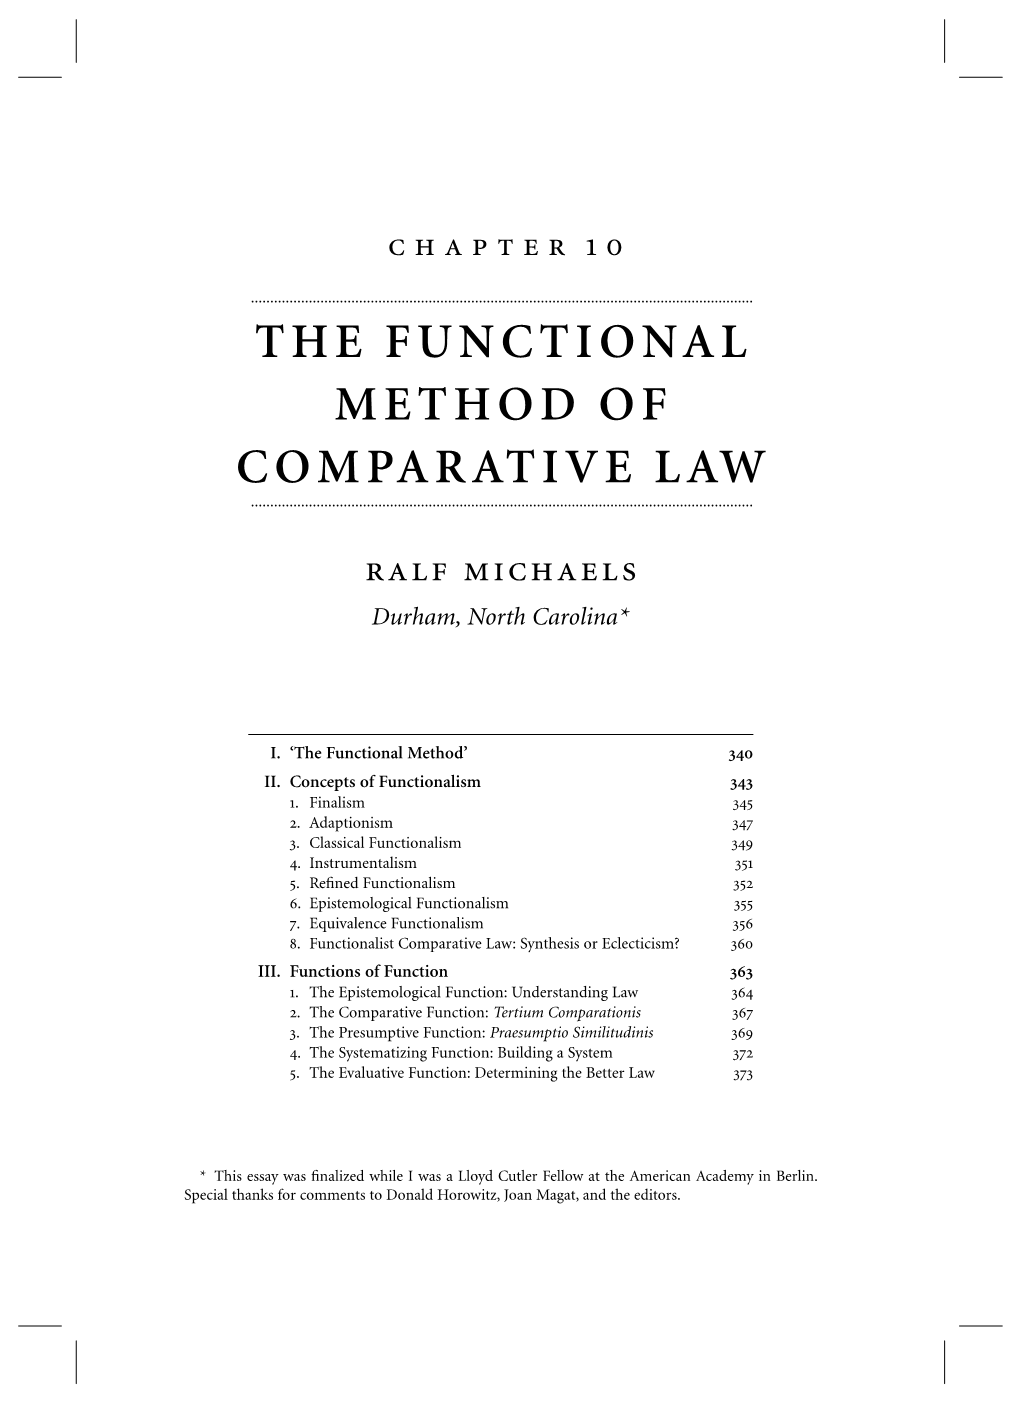 The Functional Method of Comparative Law